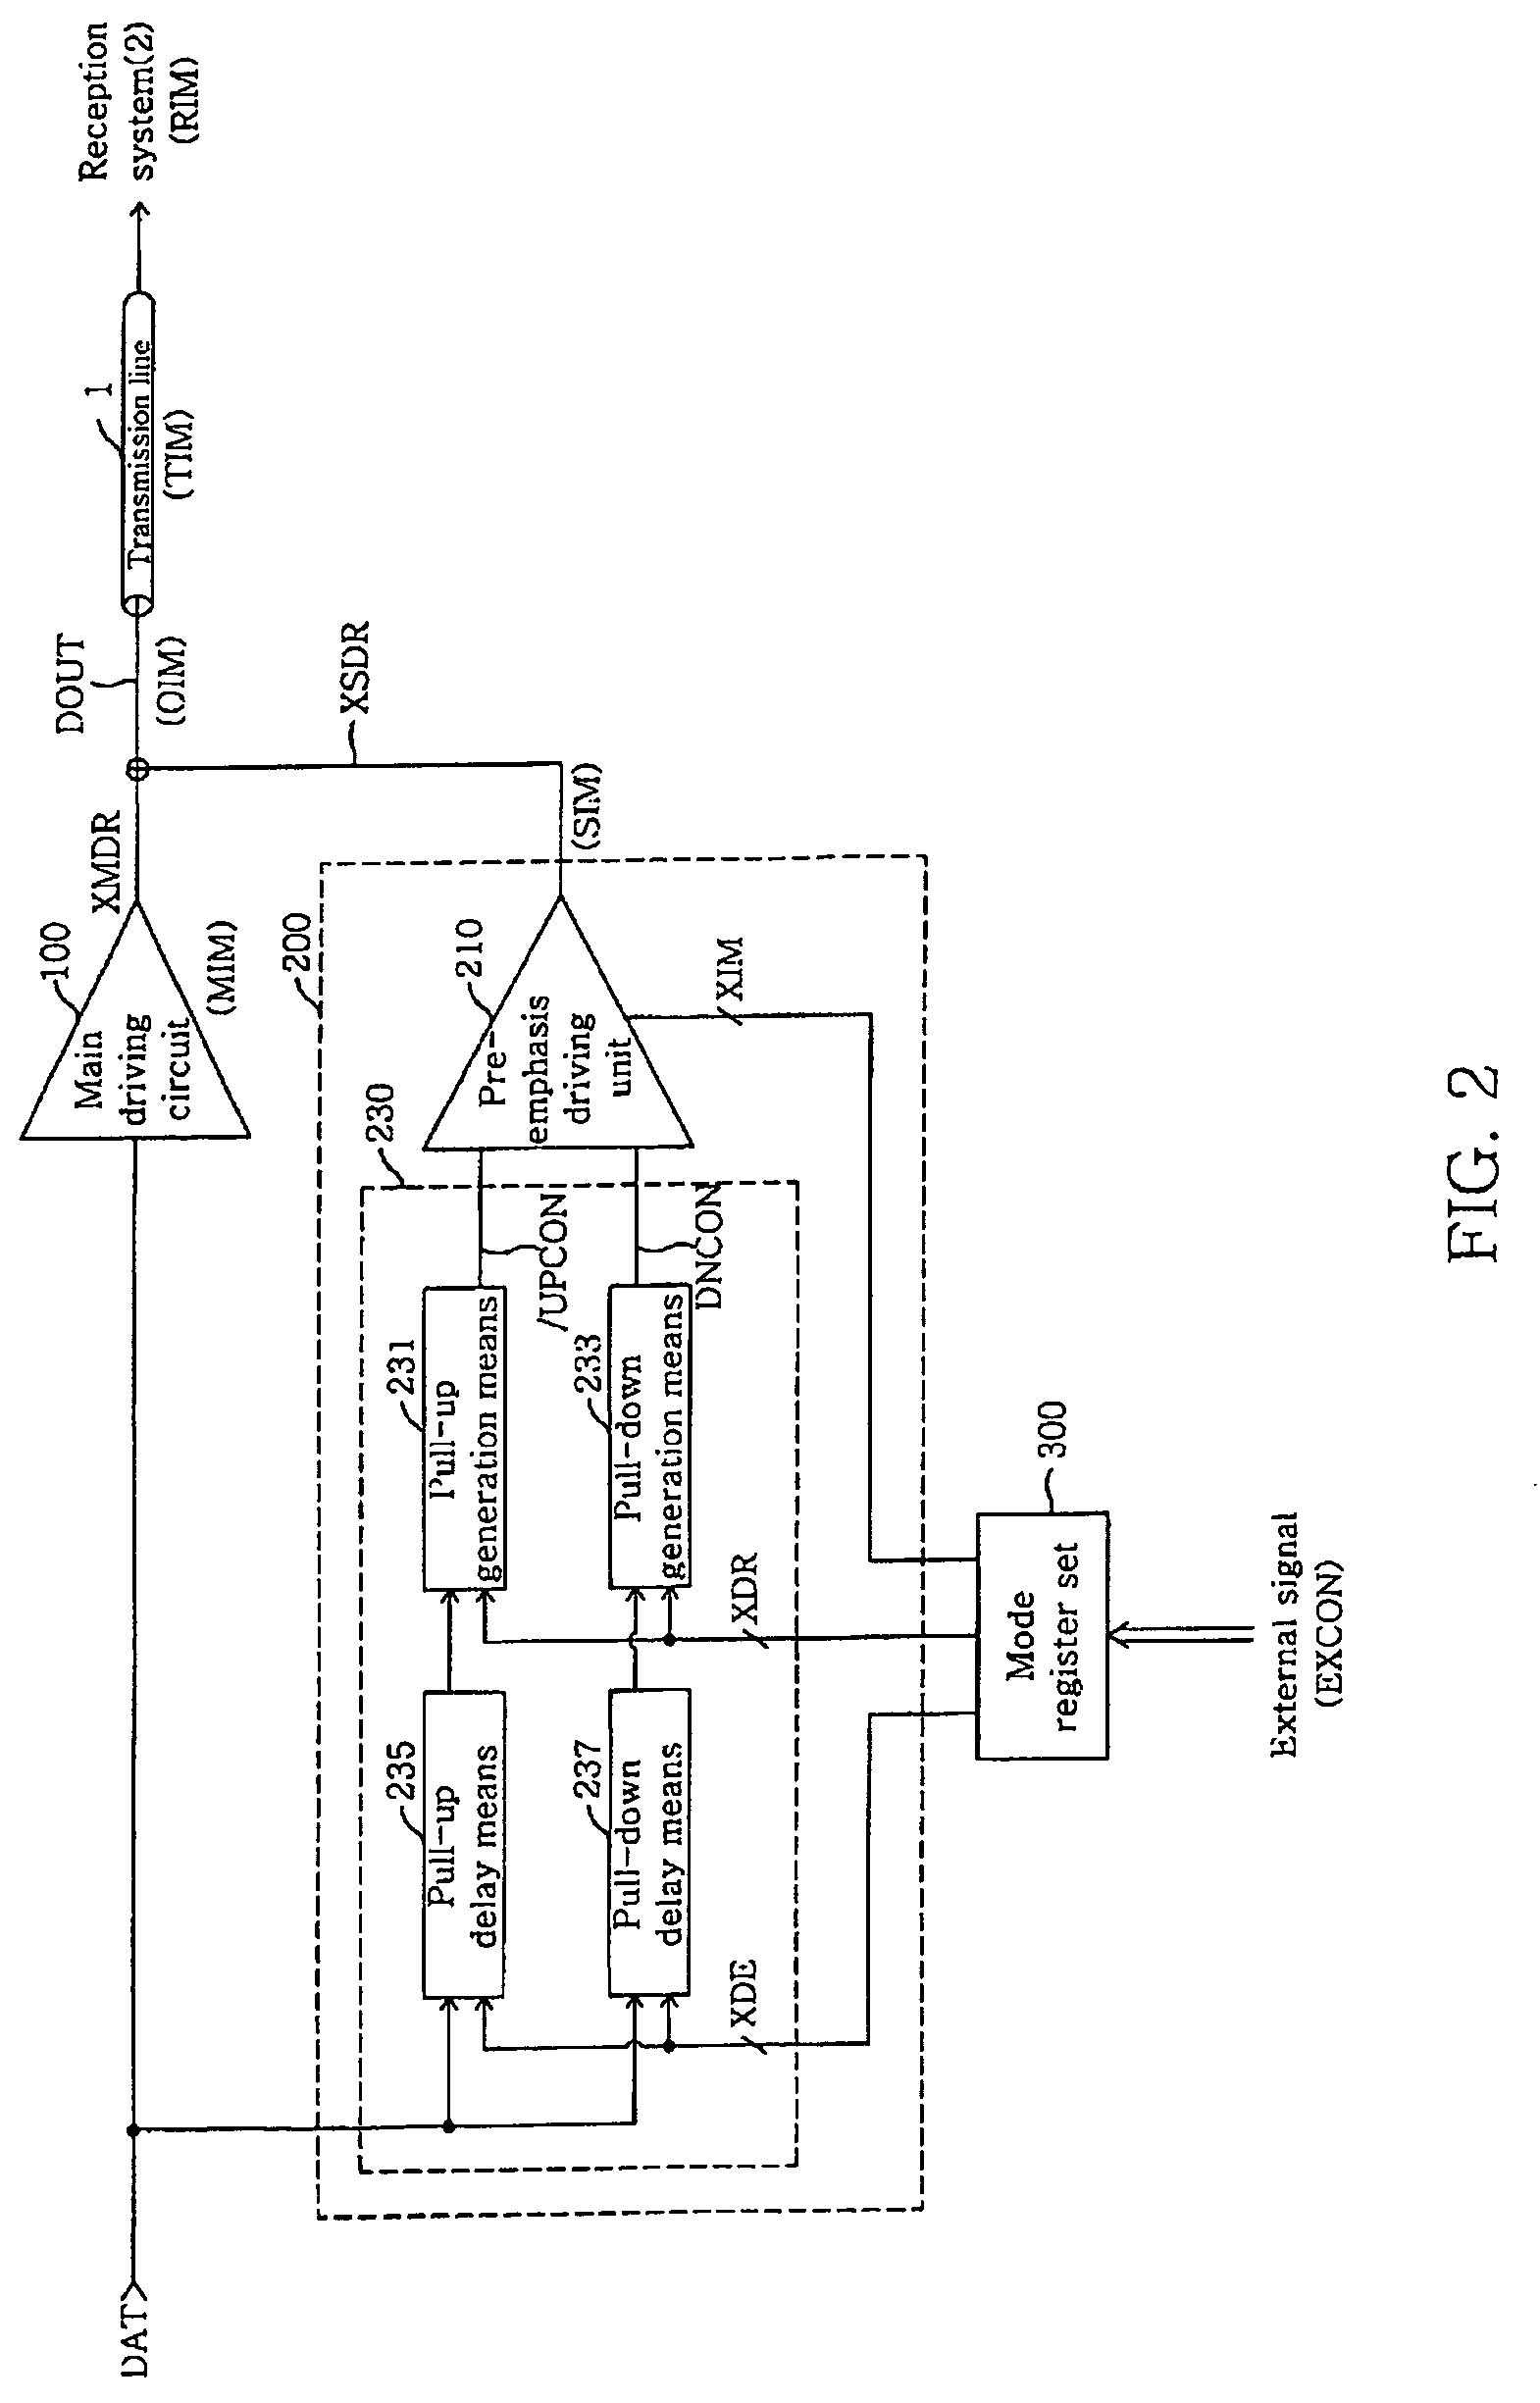 Output driver for controlling impedance and intensity of pre-emphasis driver using mode register set